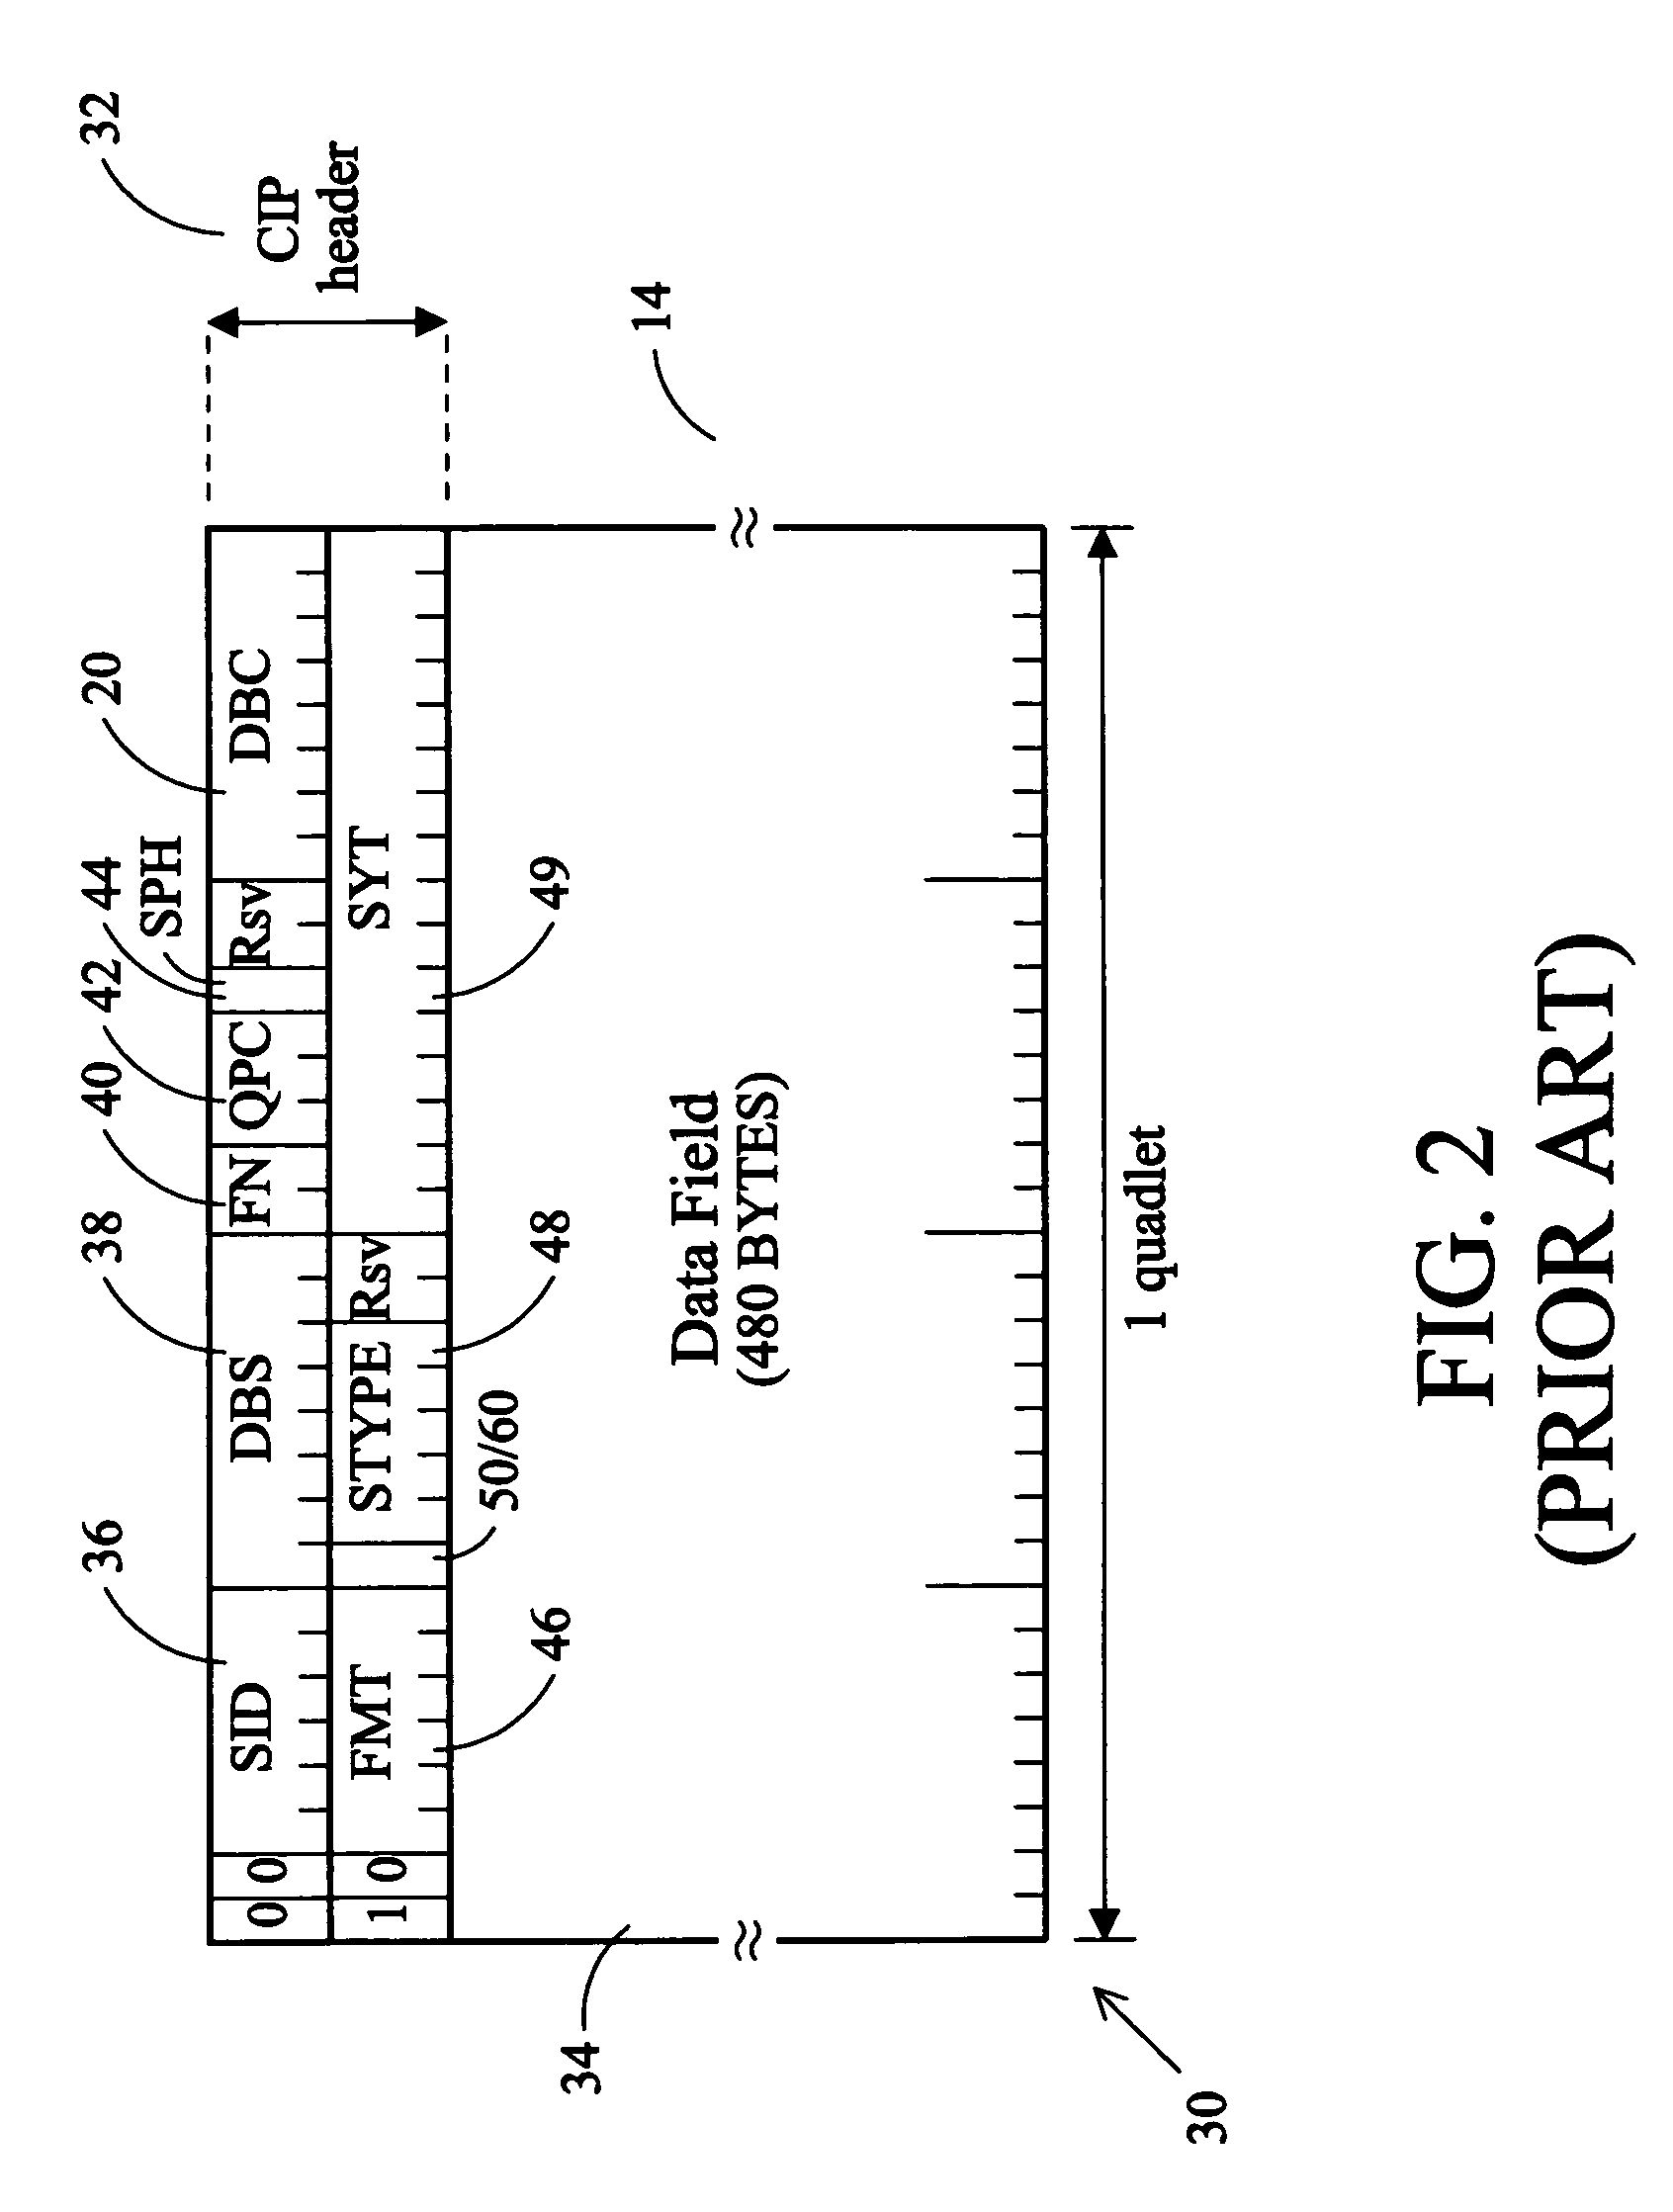 Method and apparatus for storing MPEG-2 transport streams using a conventional digital video recorder